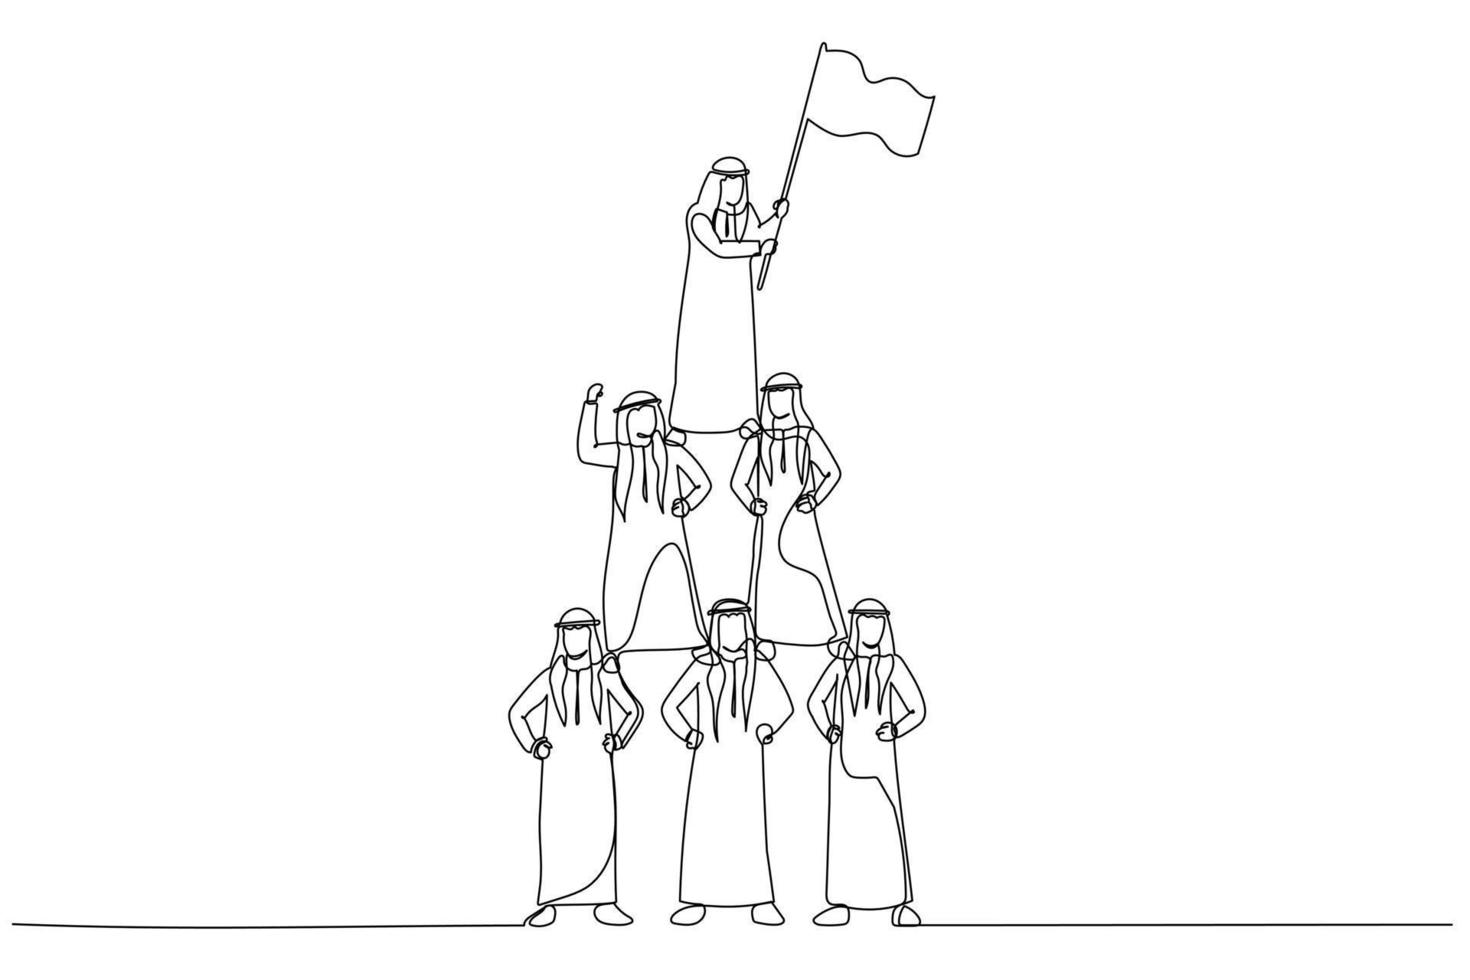 Cartoon of arab man make pyramid and lead by business leader with flag. One line art style vector